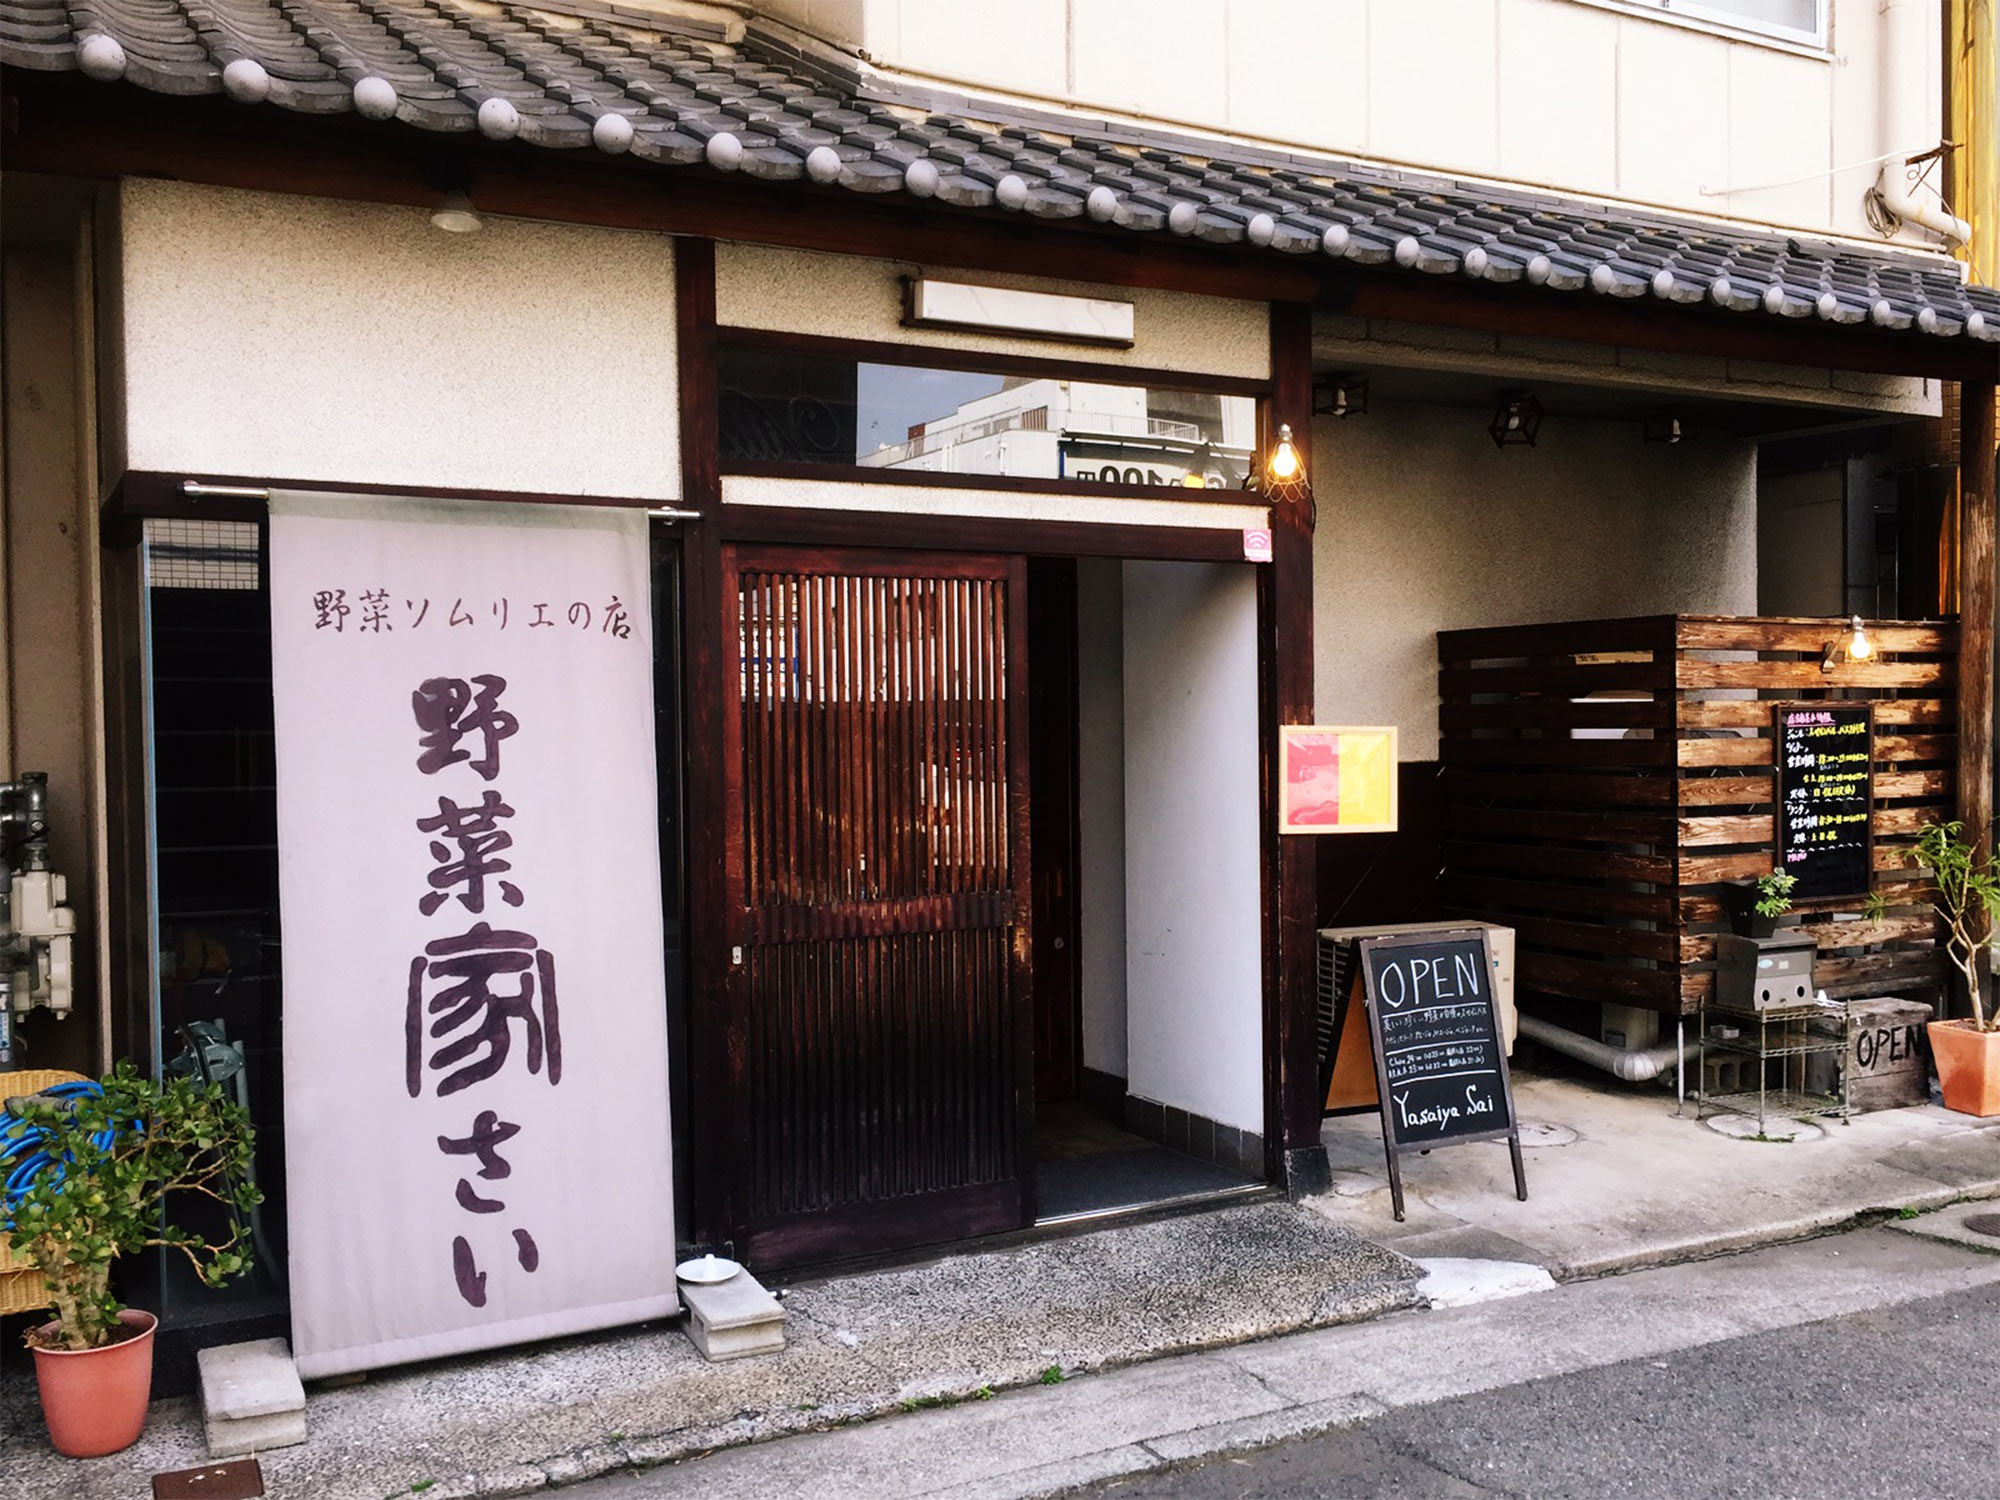 Out side of the restaurantの写真